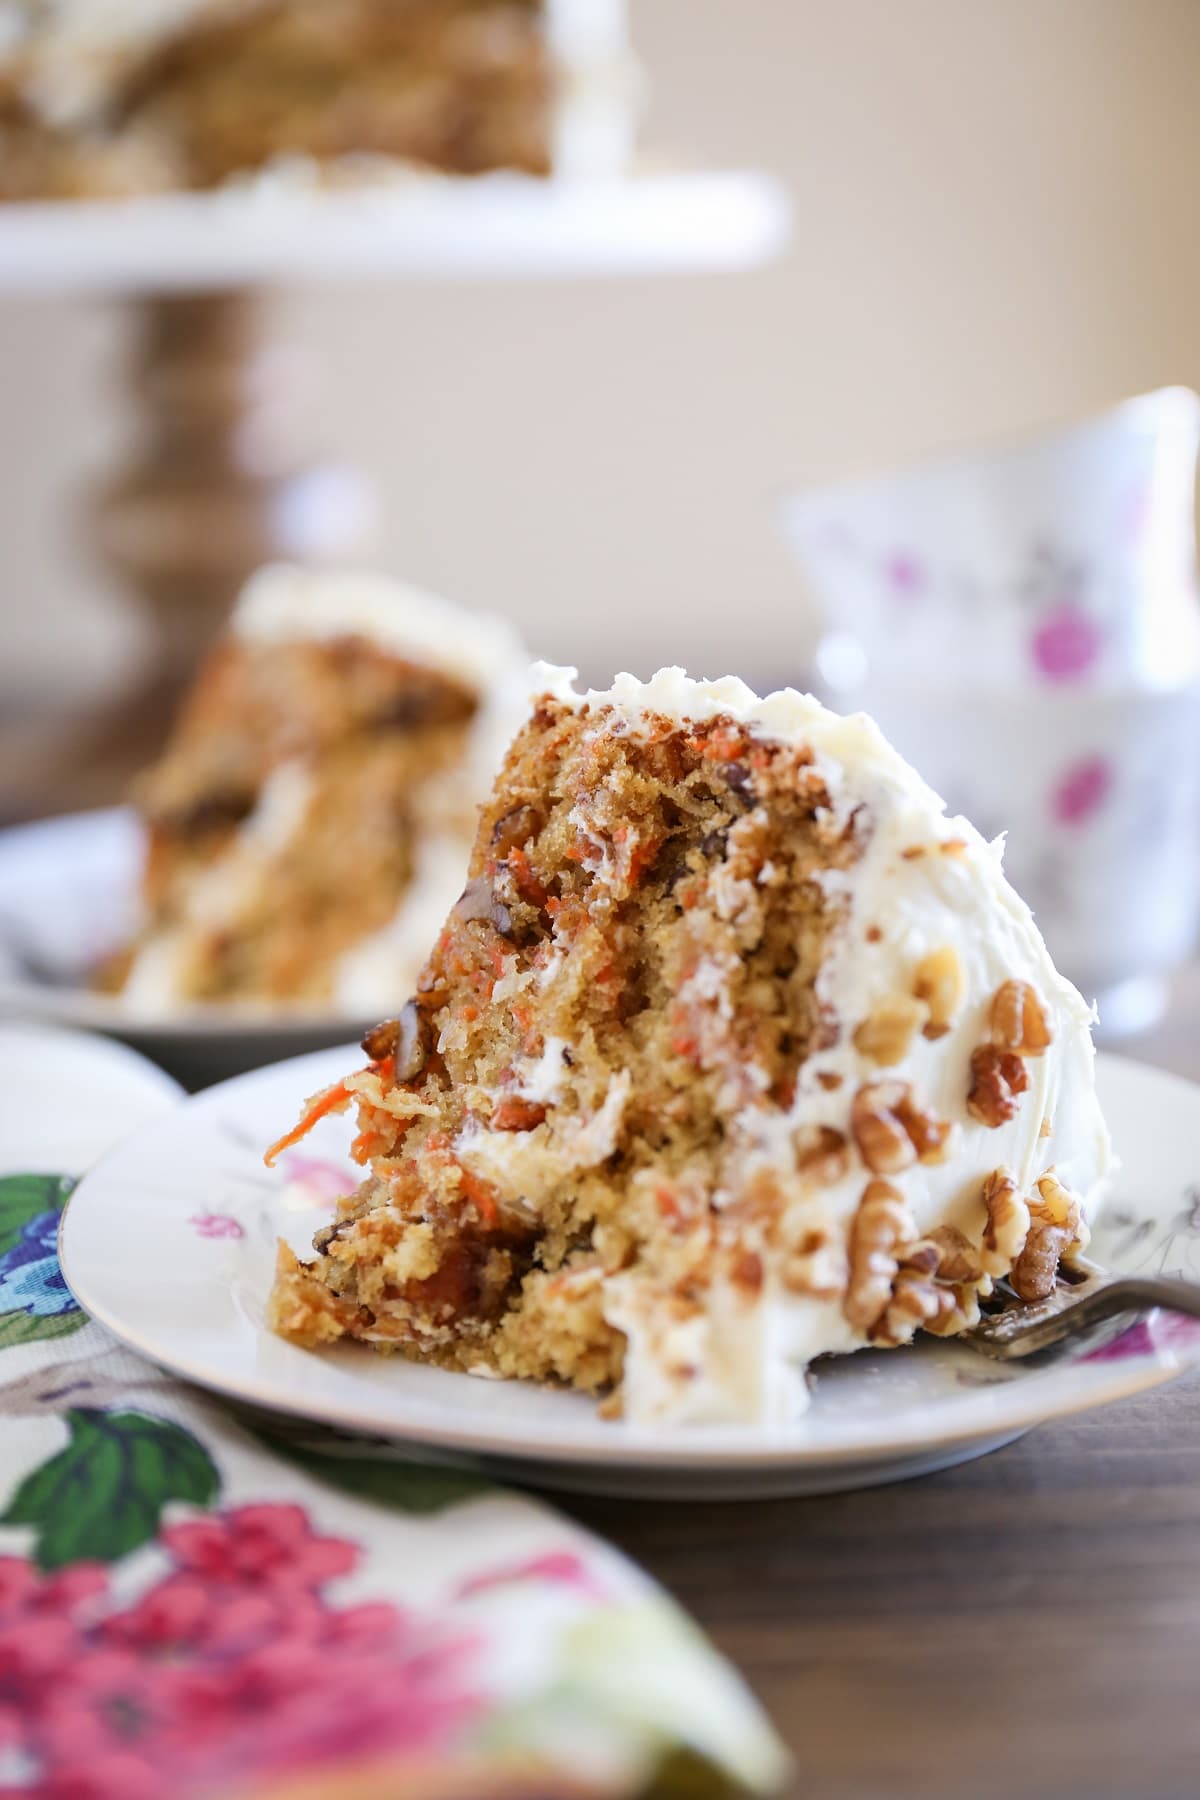 Paleo Carrot Cake - grain-free, refined sugar-free, dairy-free, and healthy! | TheRoastedRoot.net #recipe #dessert #easter #glutenfree